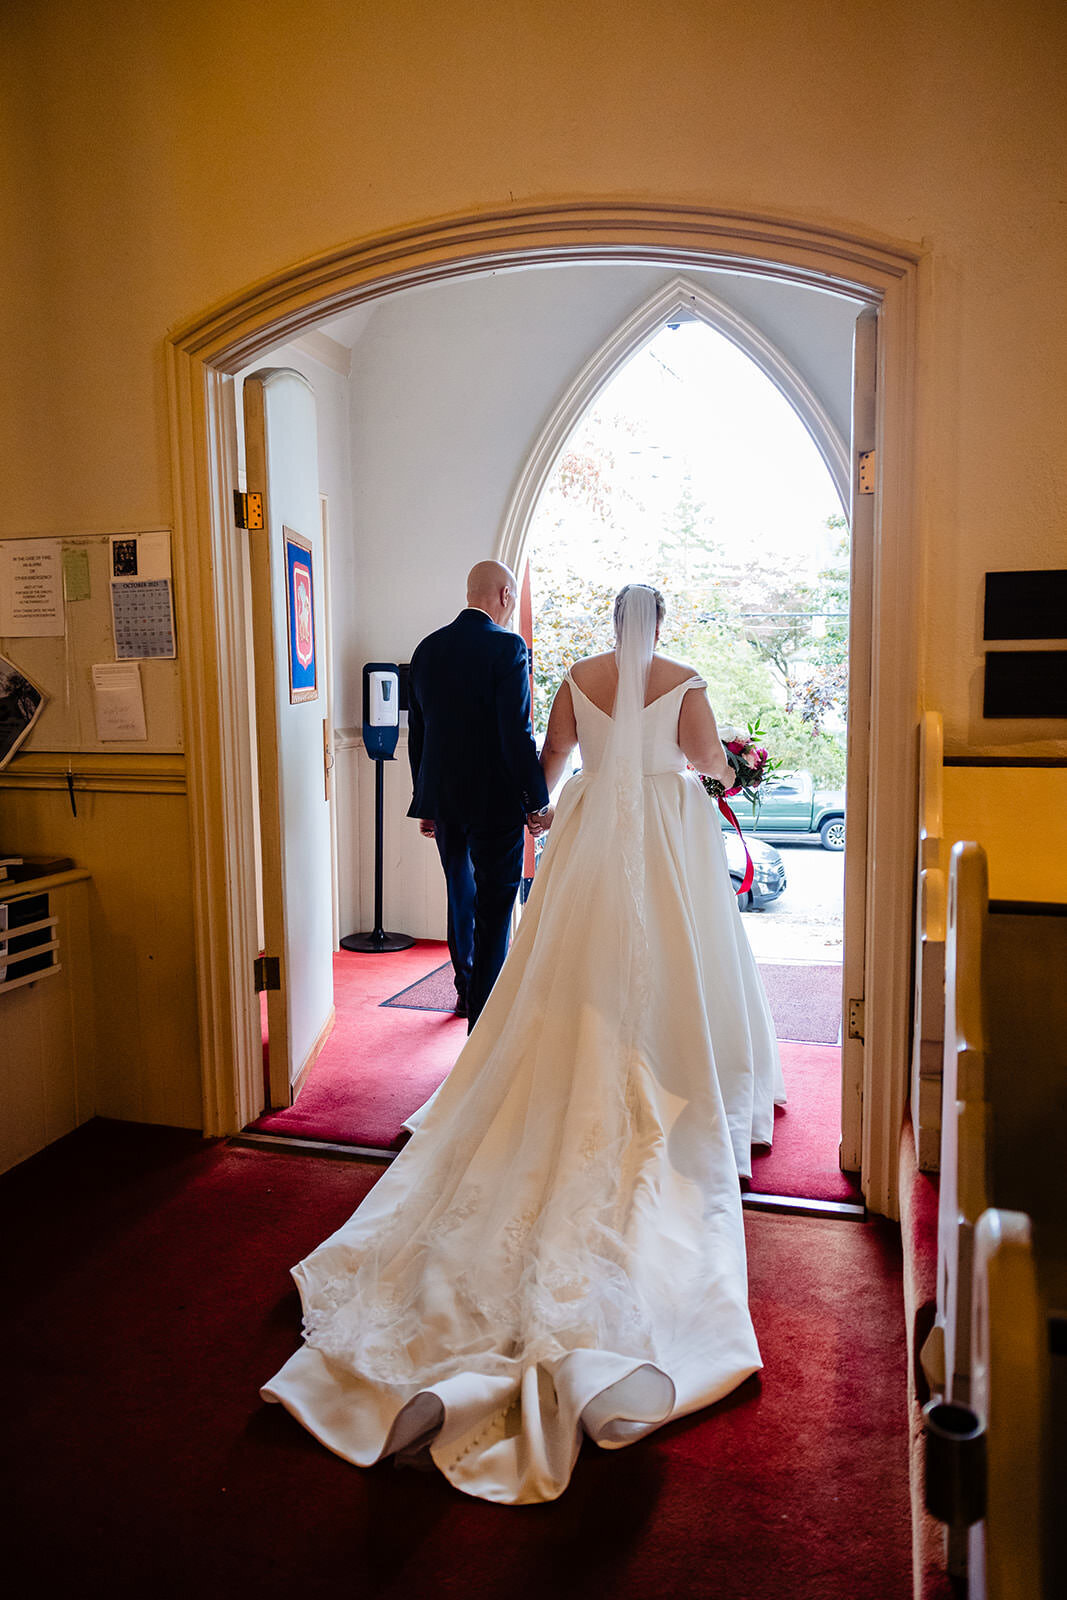 The bride and groom exit a church through a gothic arch door, viewed from behind highlighting the bride's flowing gown